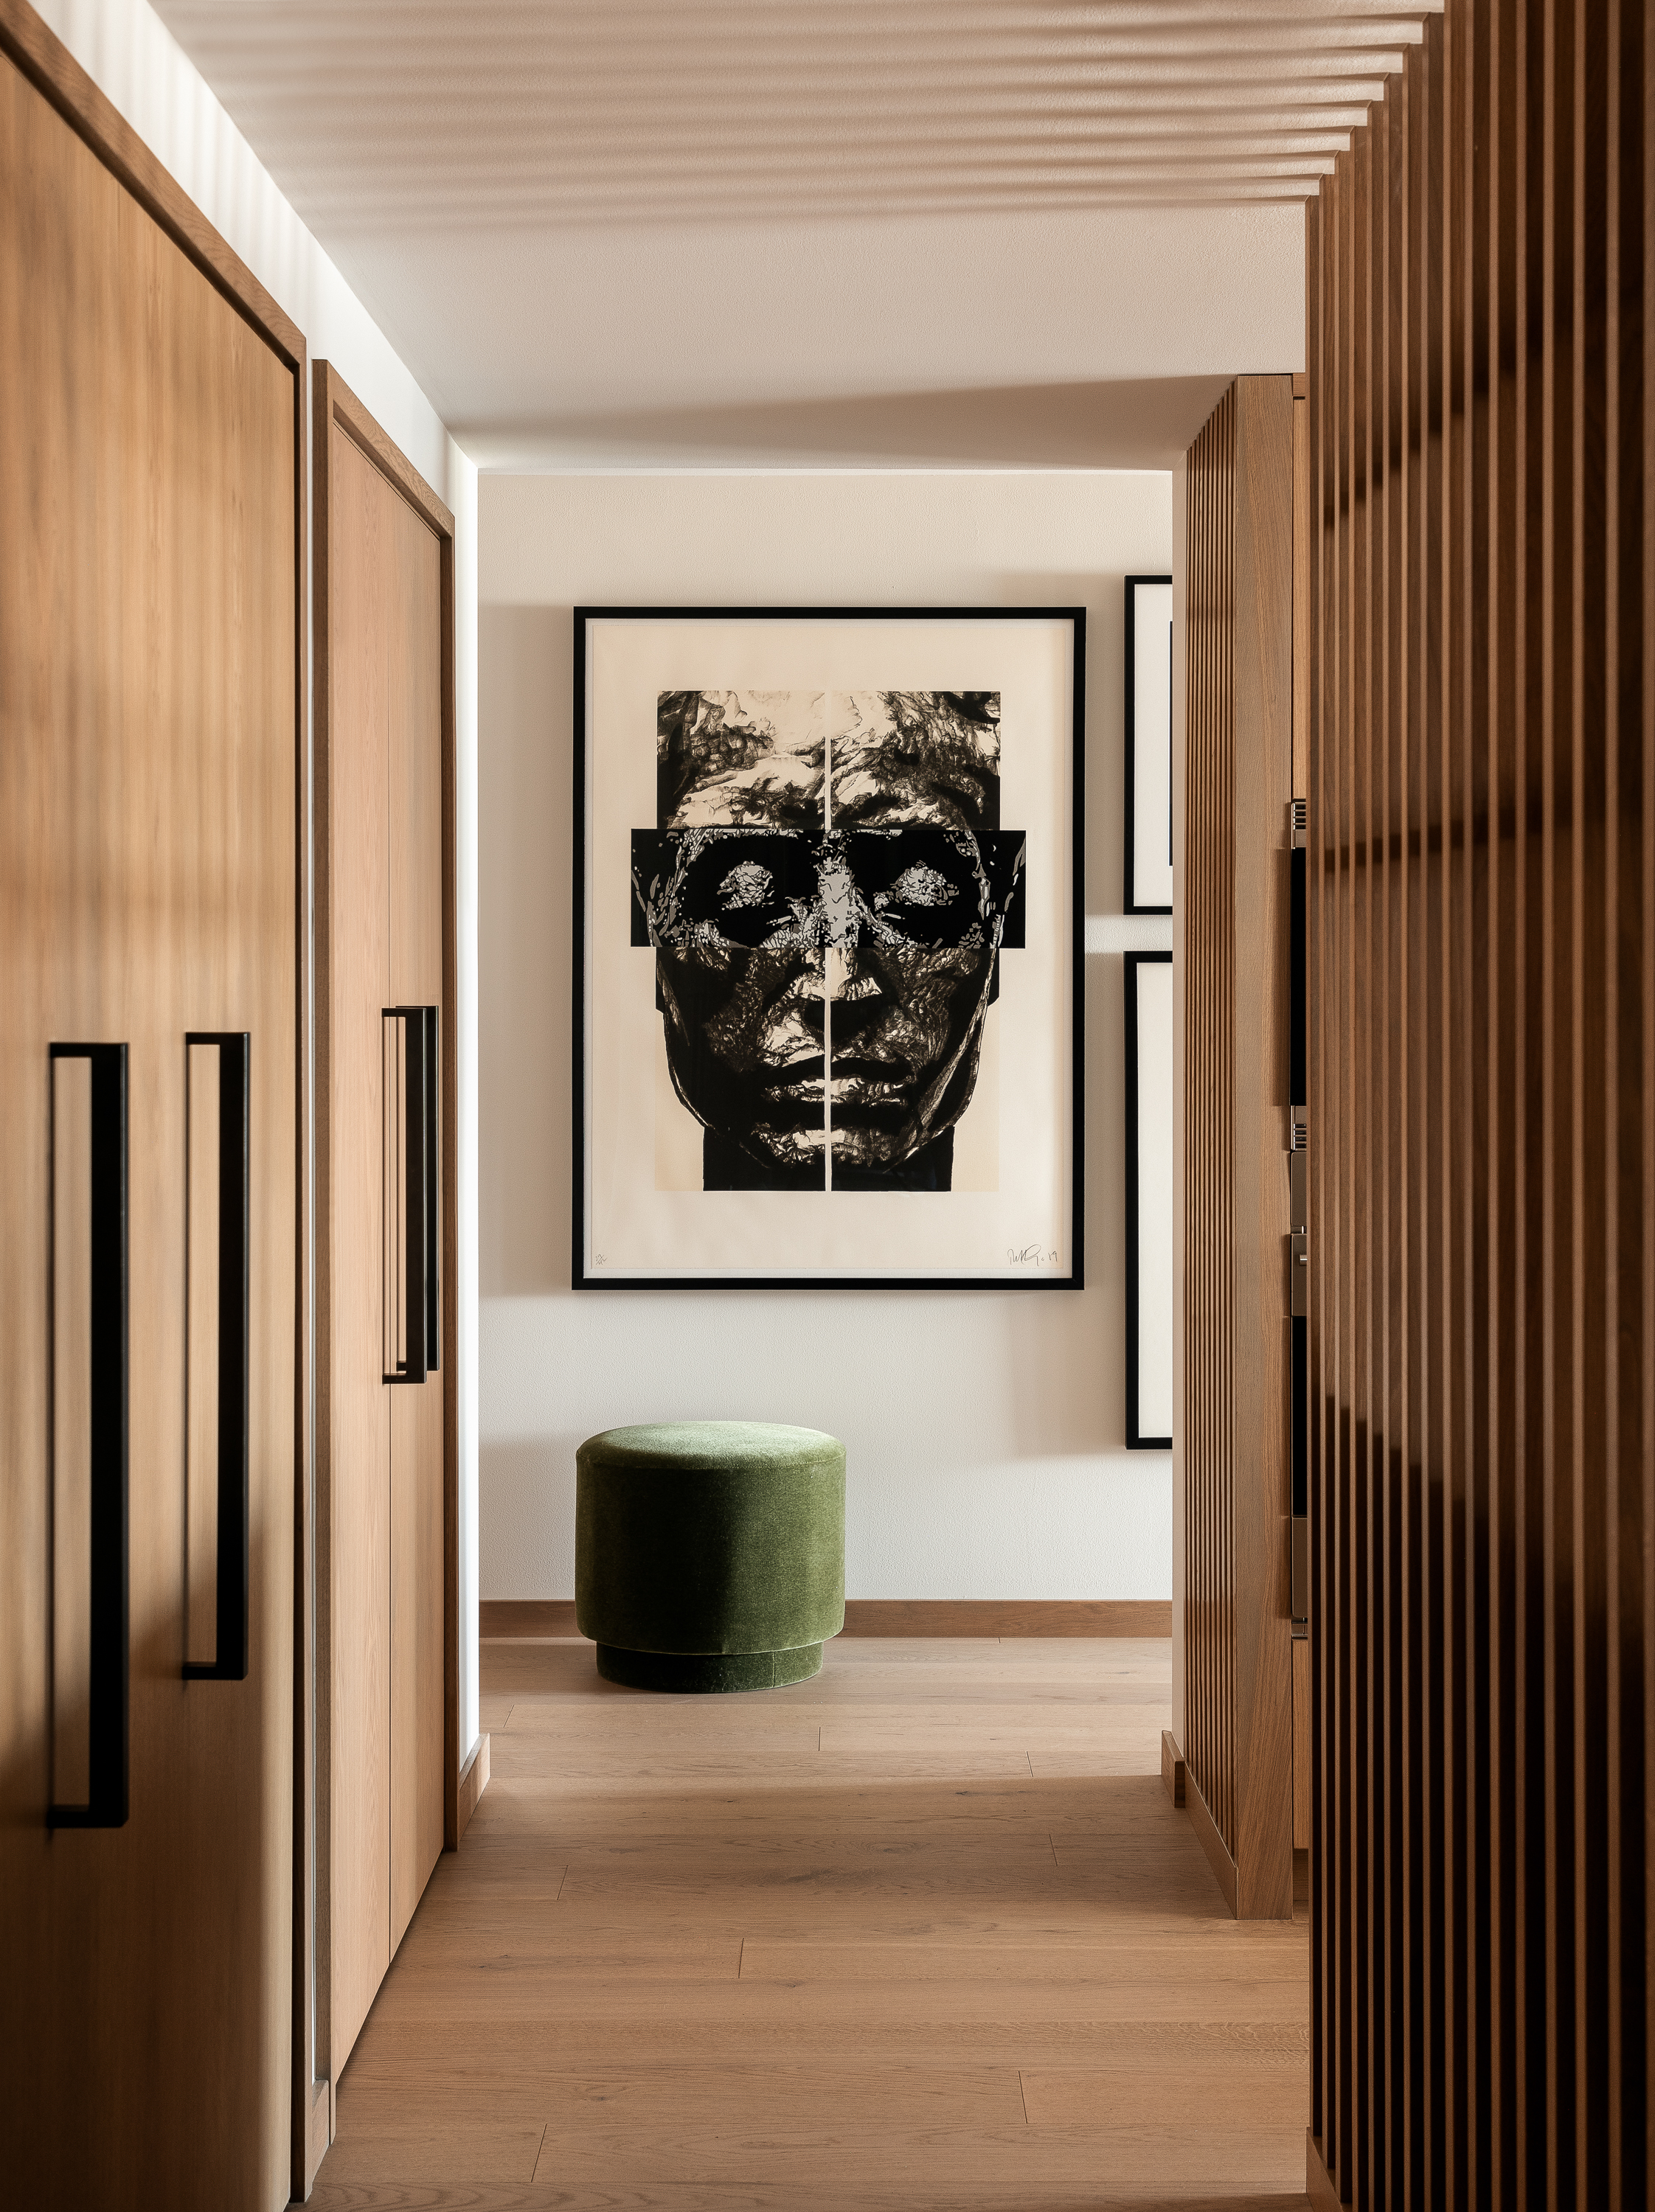 A Robert Longo Painting at the end of a white oak finish hallway.